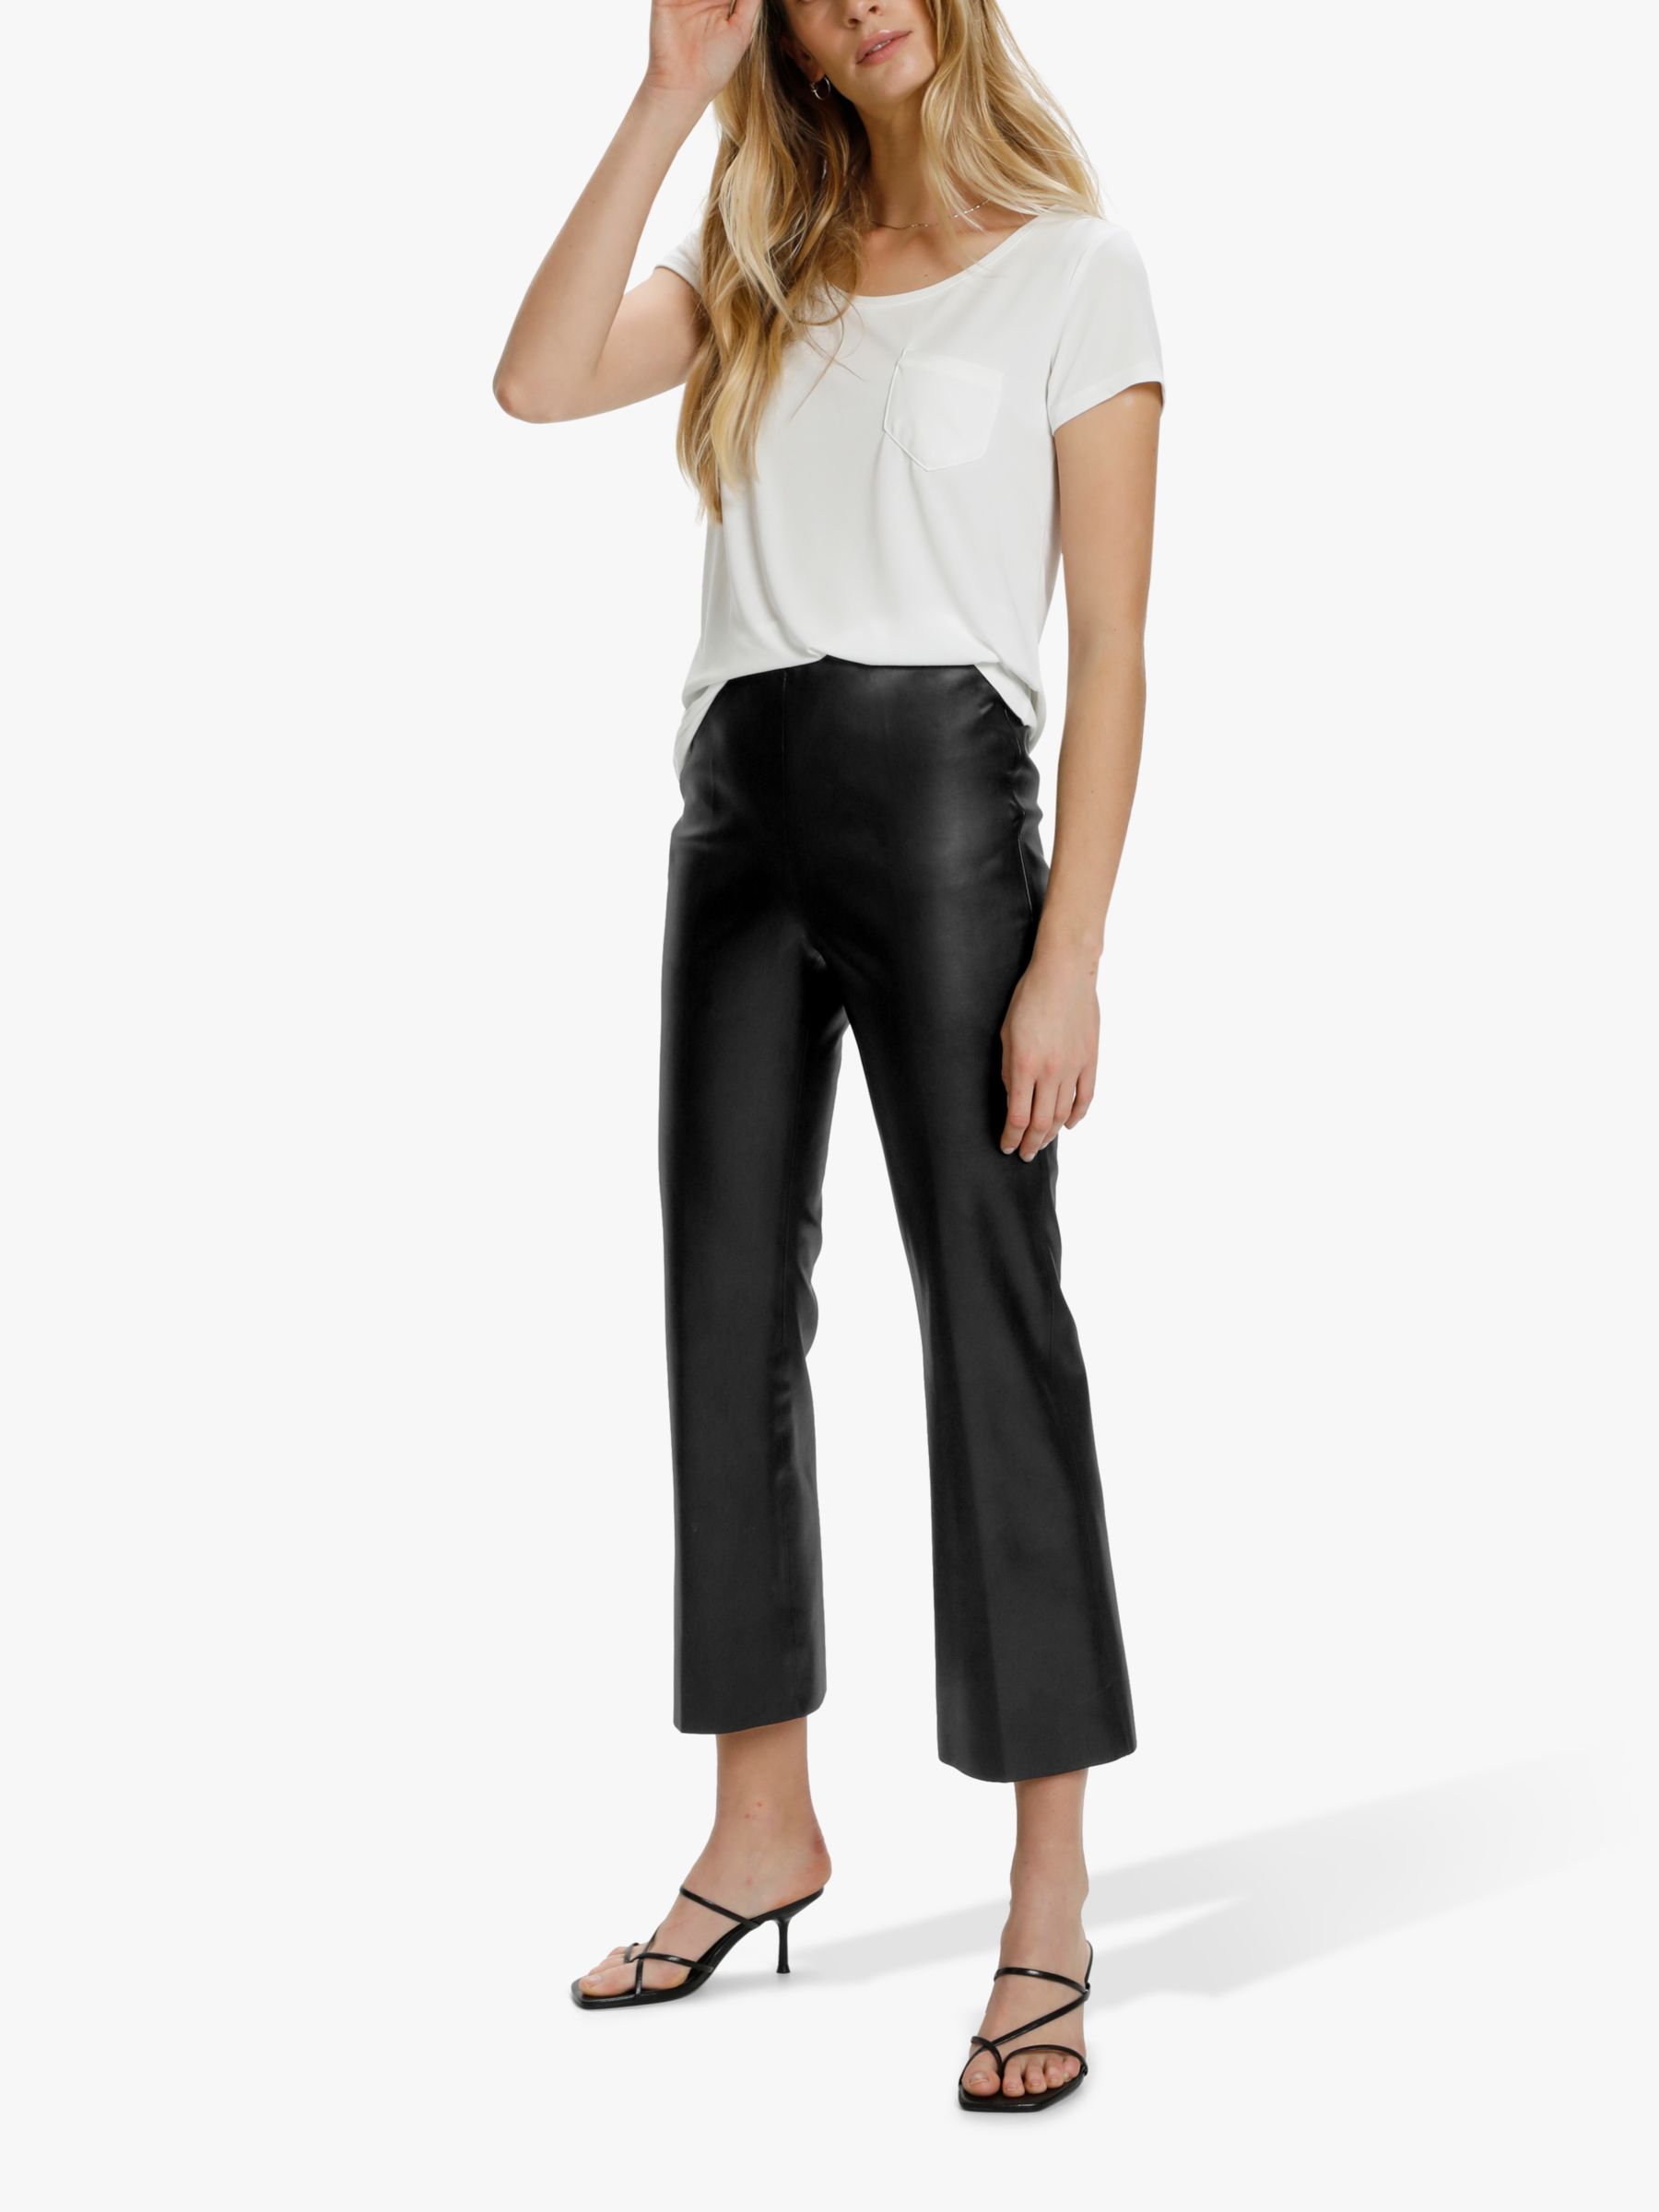 Soaked In Luxury Kaylee Faux Leather Kick Flare Trousers, Black, XS